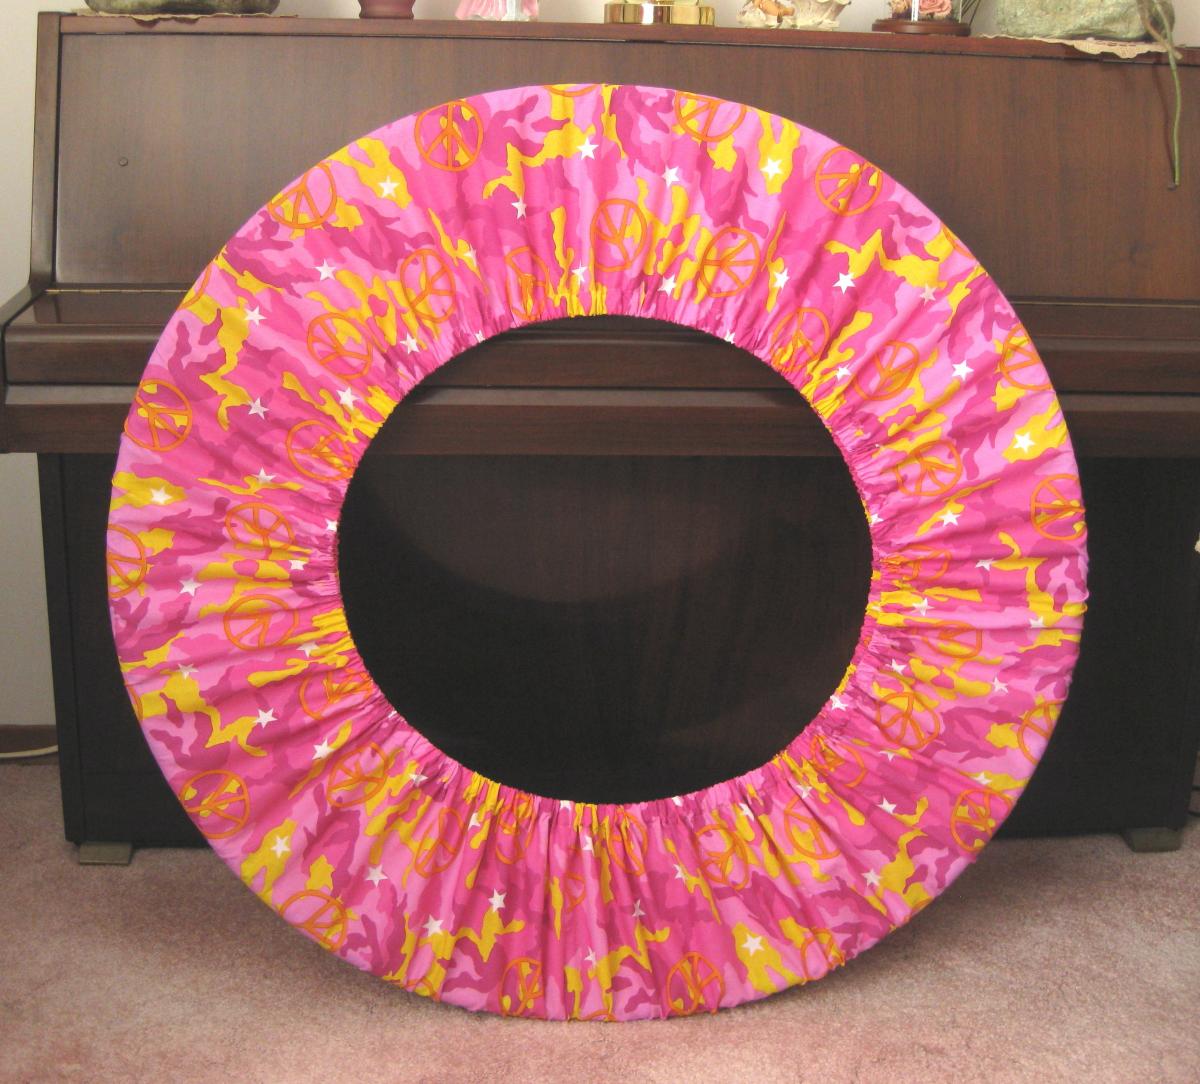 Peace Sign Hula Hoop Holder Cover Pink And Yellow Camo Print For Travel Hooping Festival Accessory Exercise Fitness Equipment Storage Bag